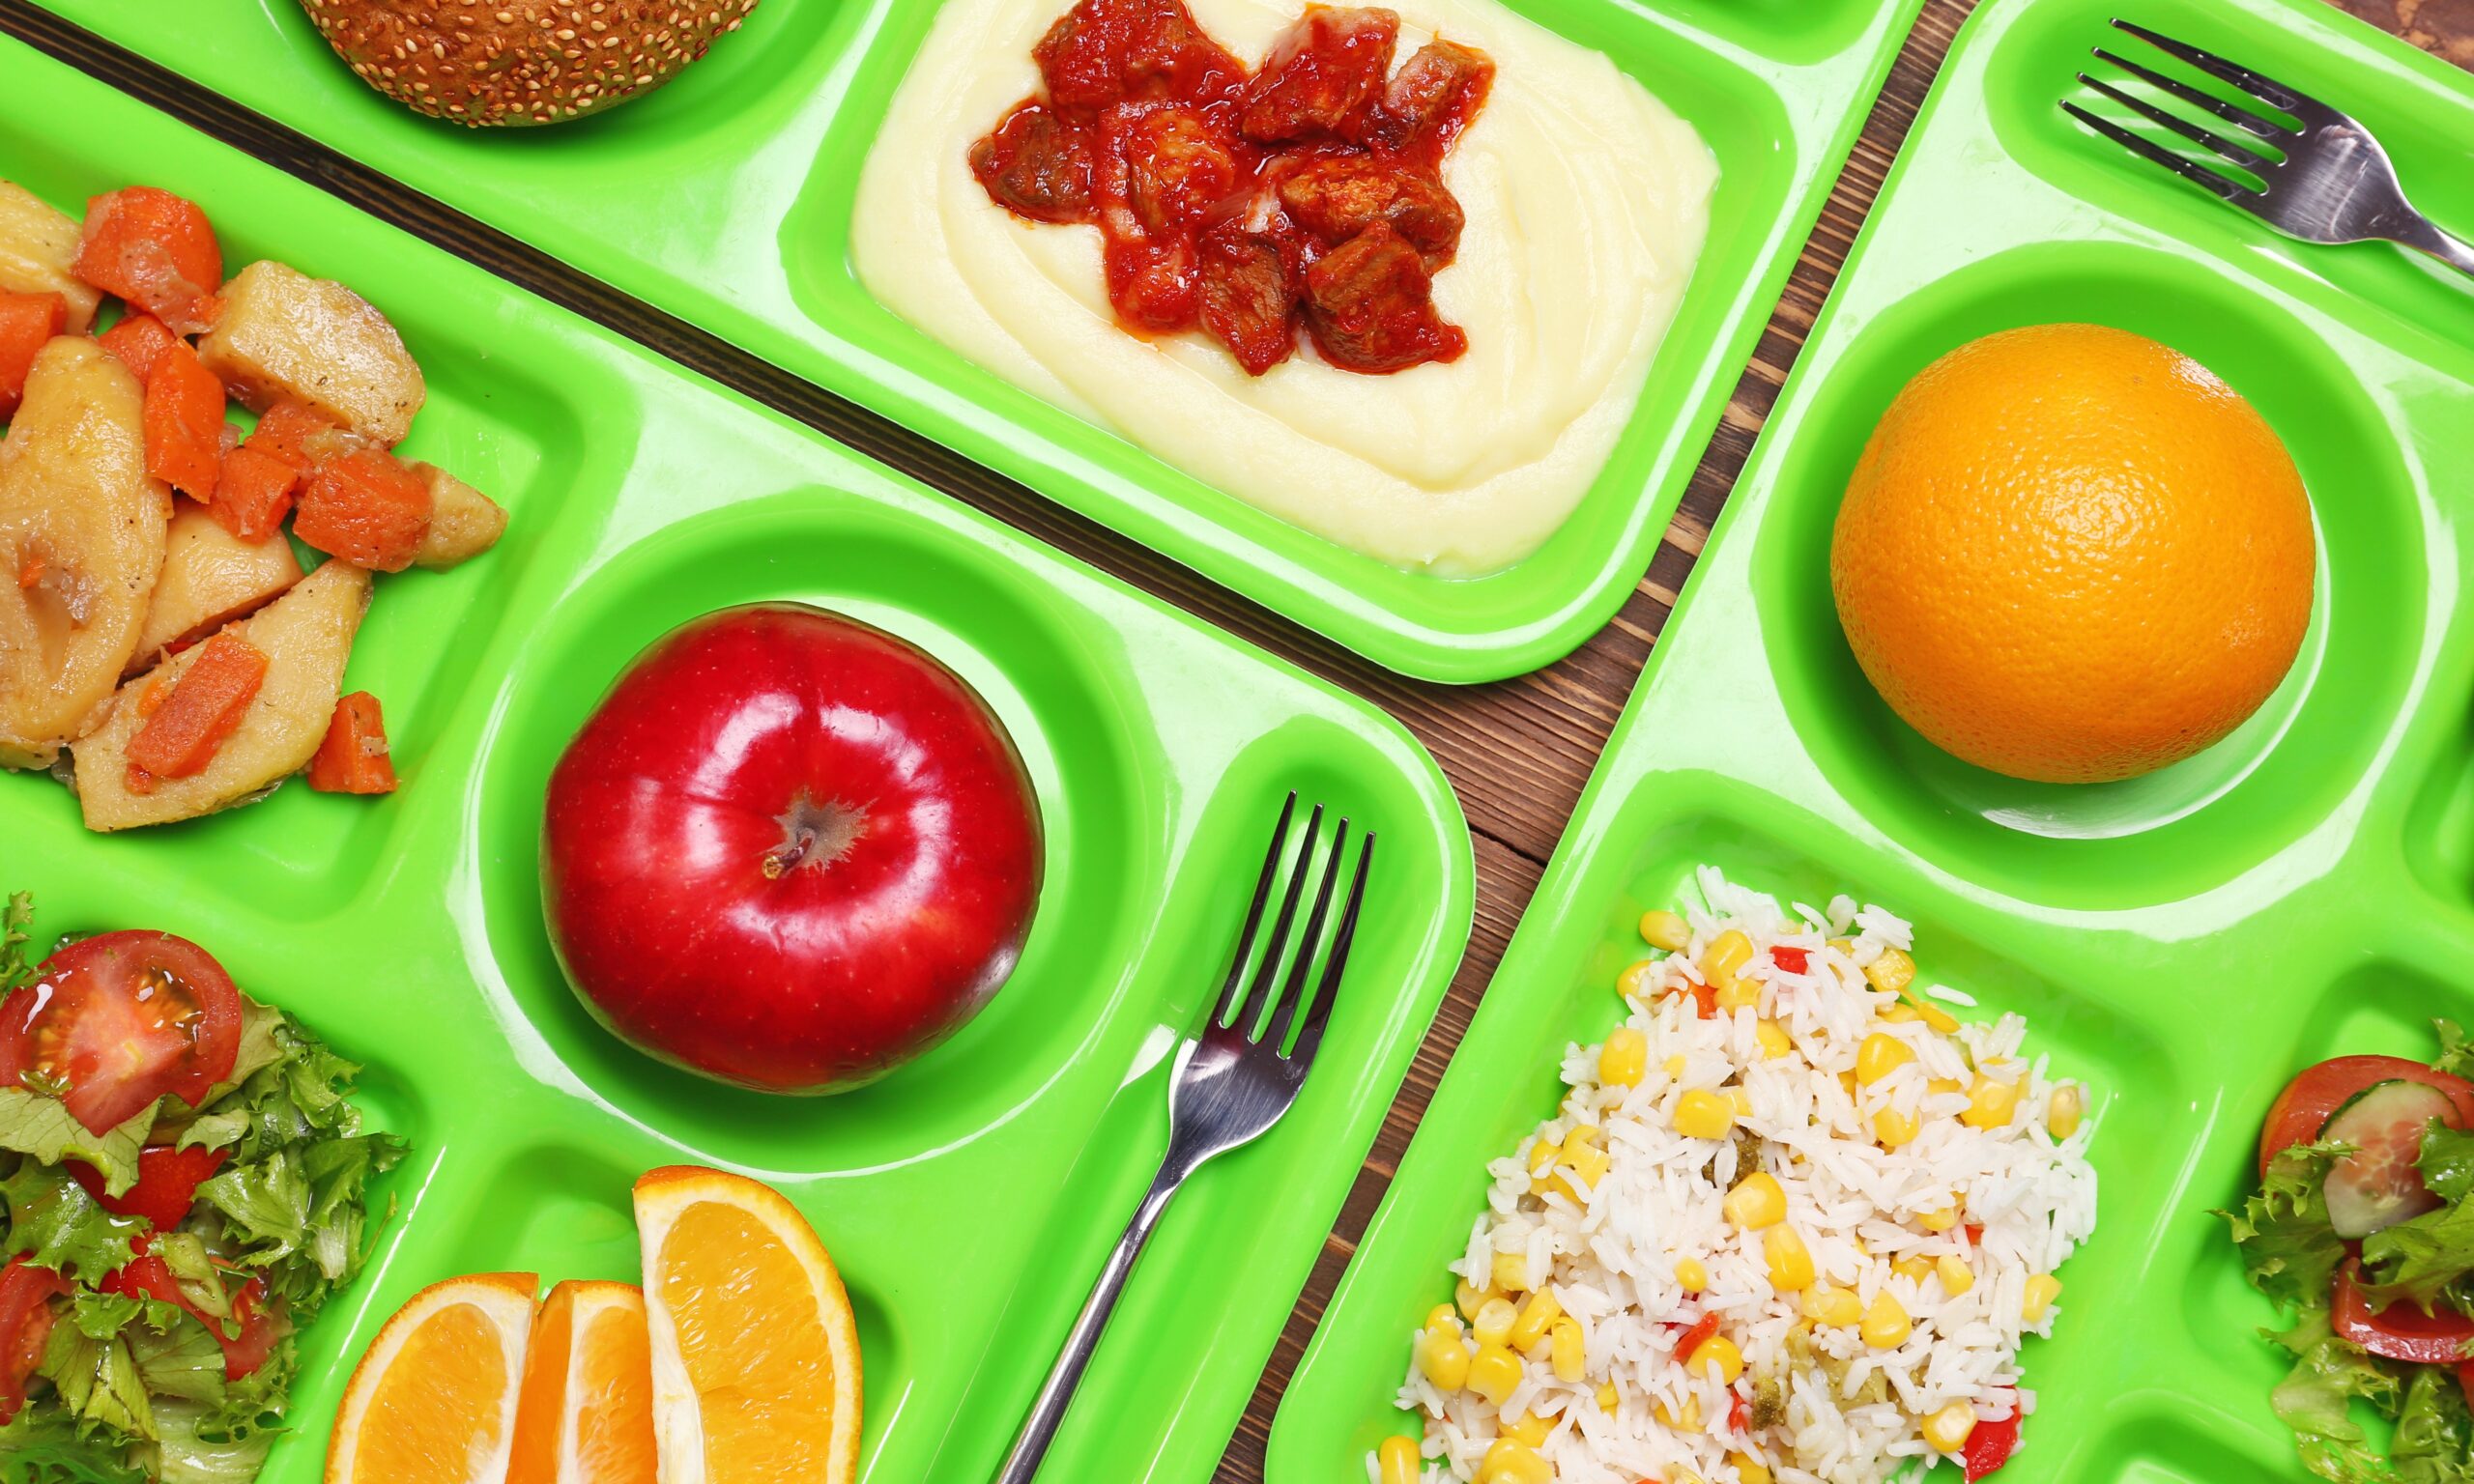 A photograph of multiple bright green cafeteria trays set close together featuring apples, oranges, grain dishes, rice and salads. Brightly colored image.